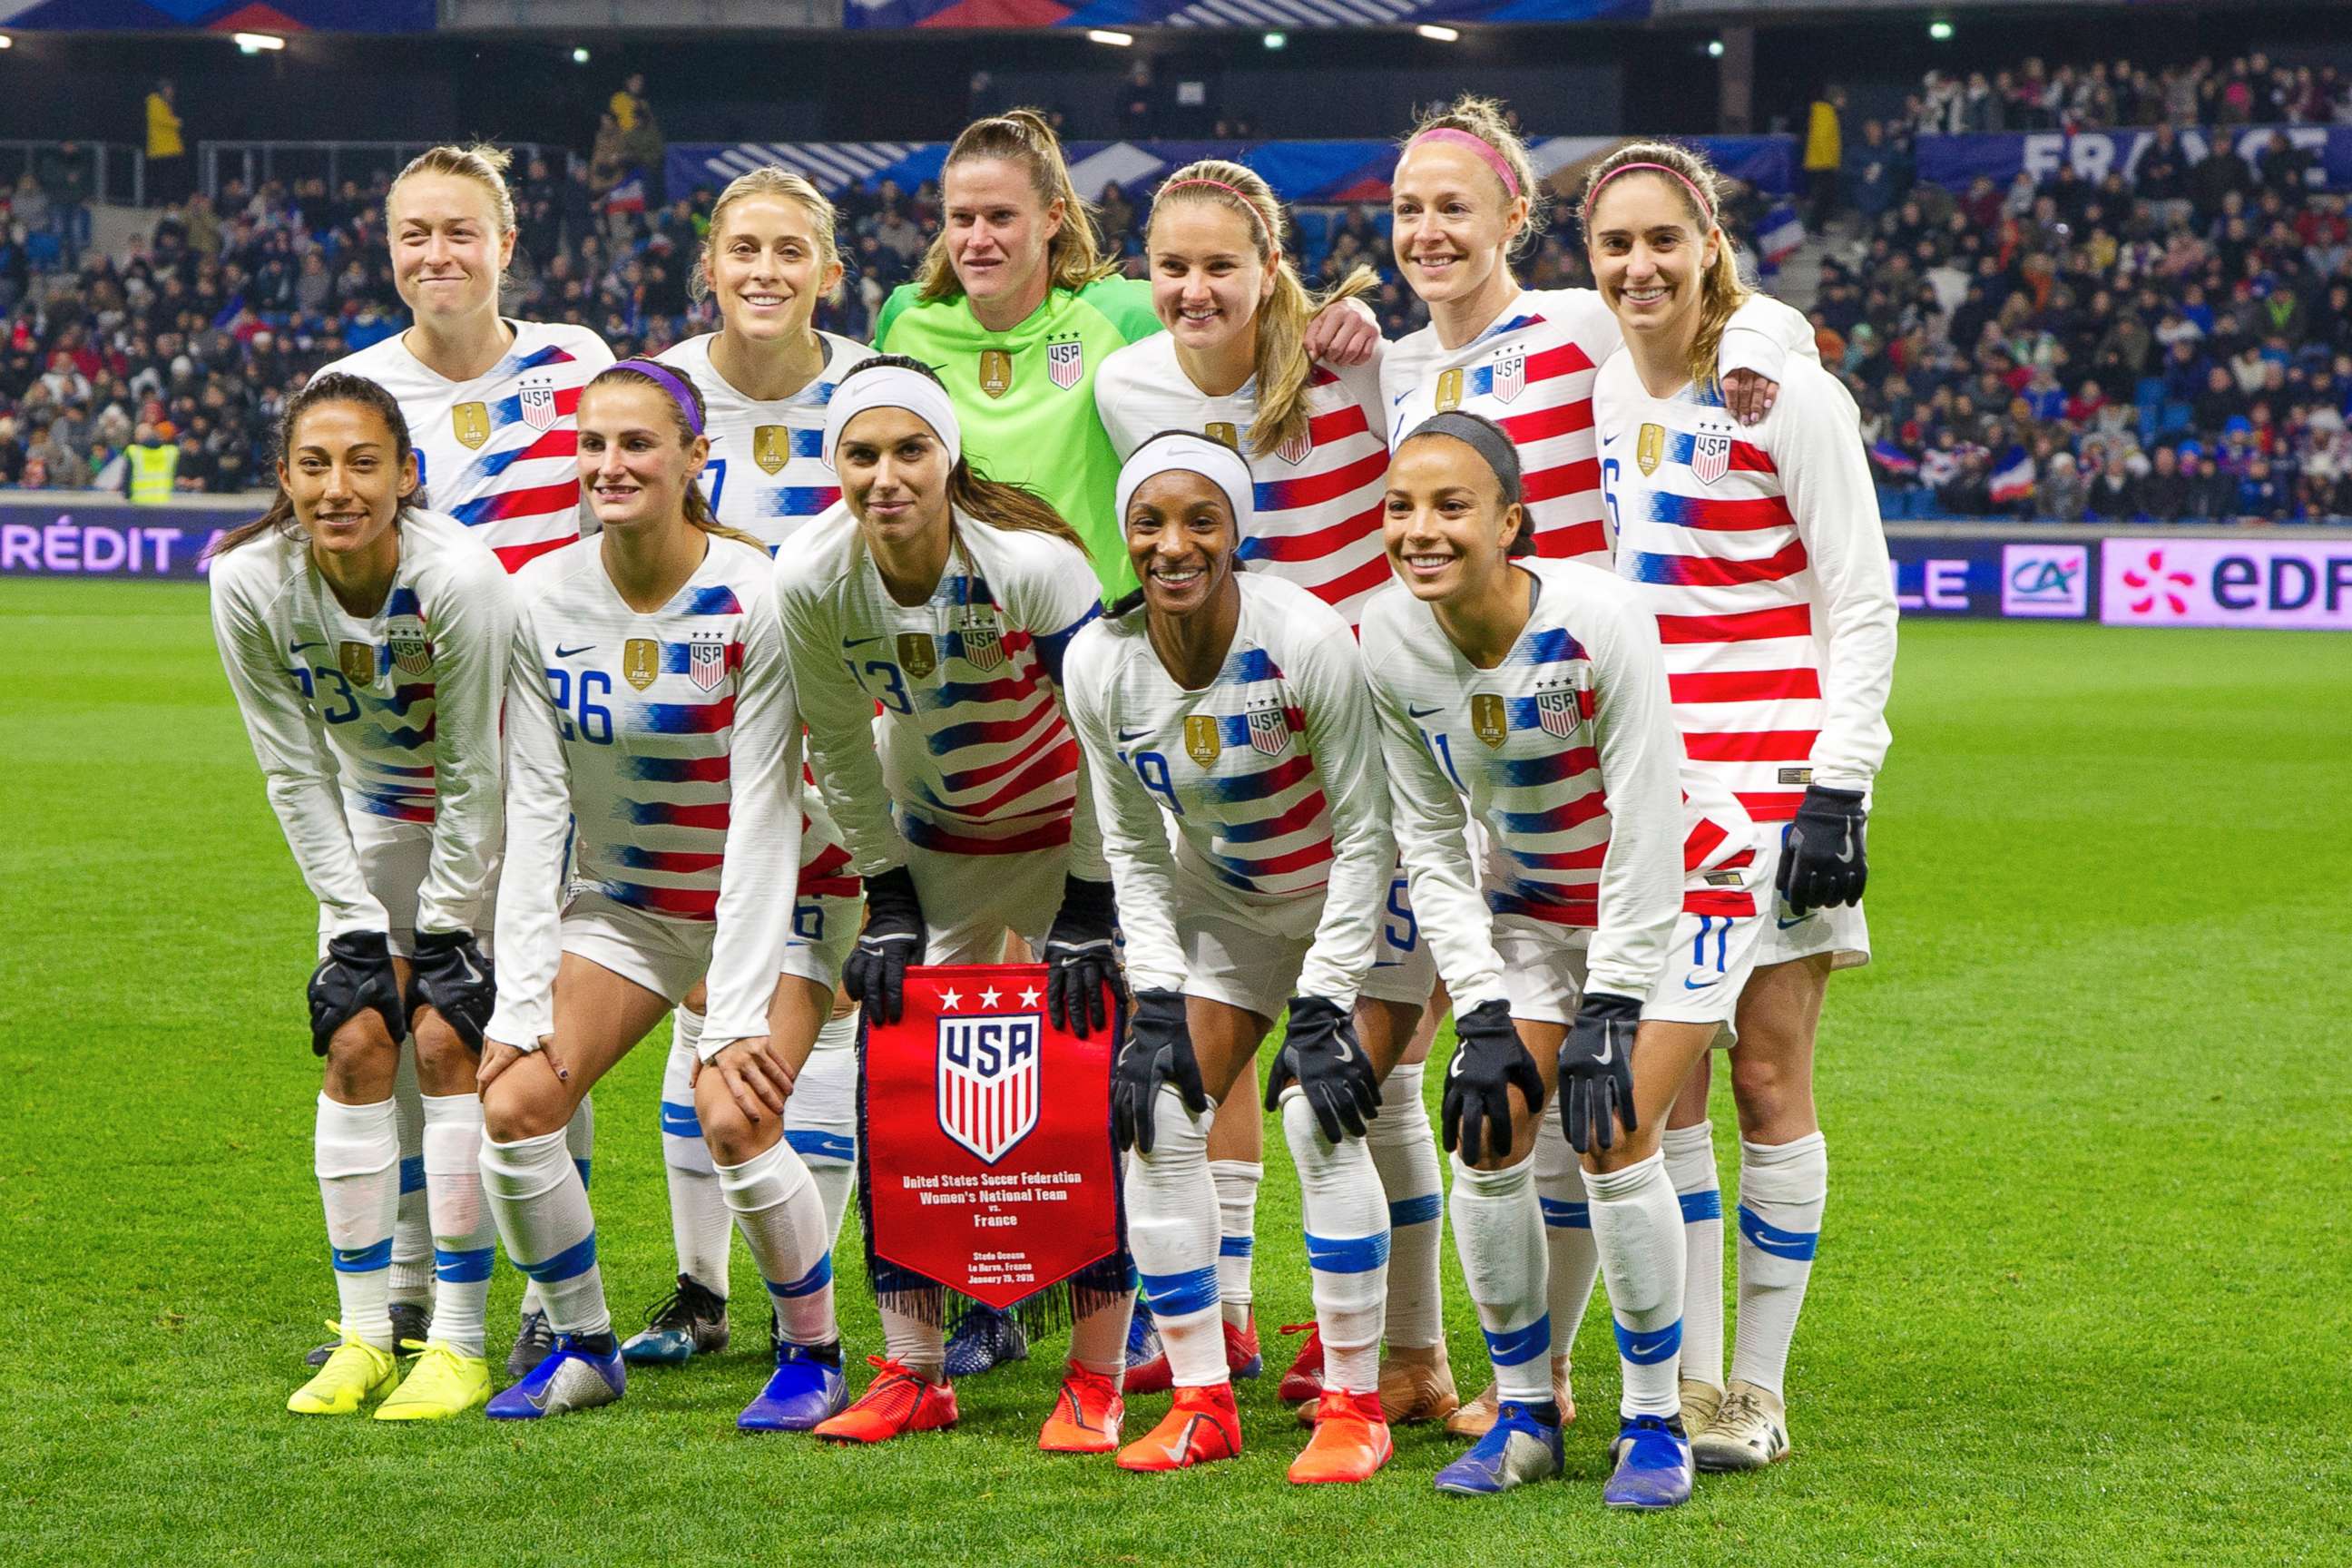 PHOTO: U.S.team soccer at the women's friendly football match between France and USA at Oceane stadium in Le Havre, France, on Jan.19, 2019.